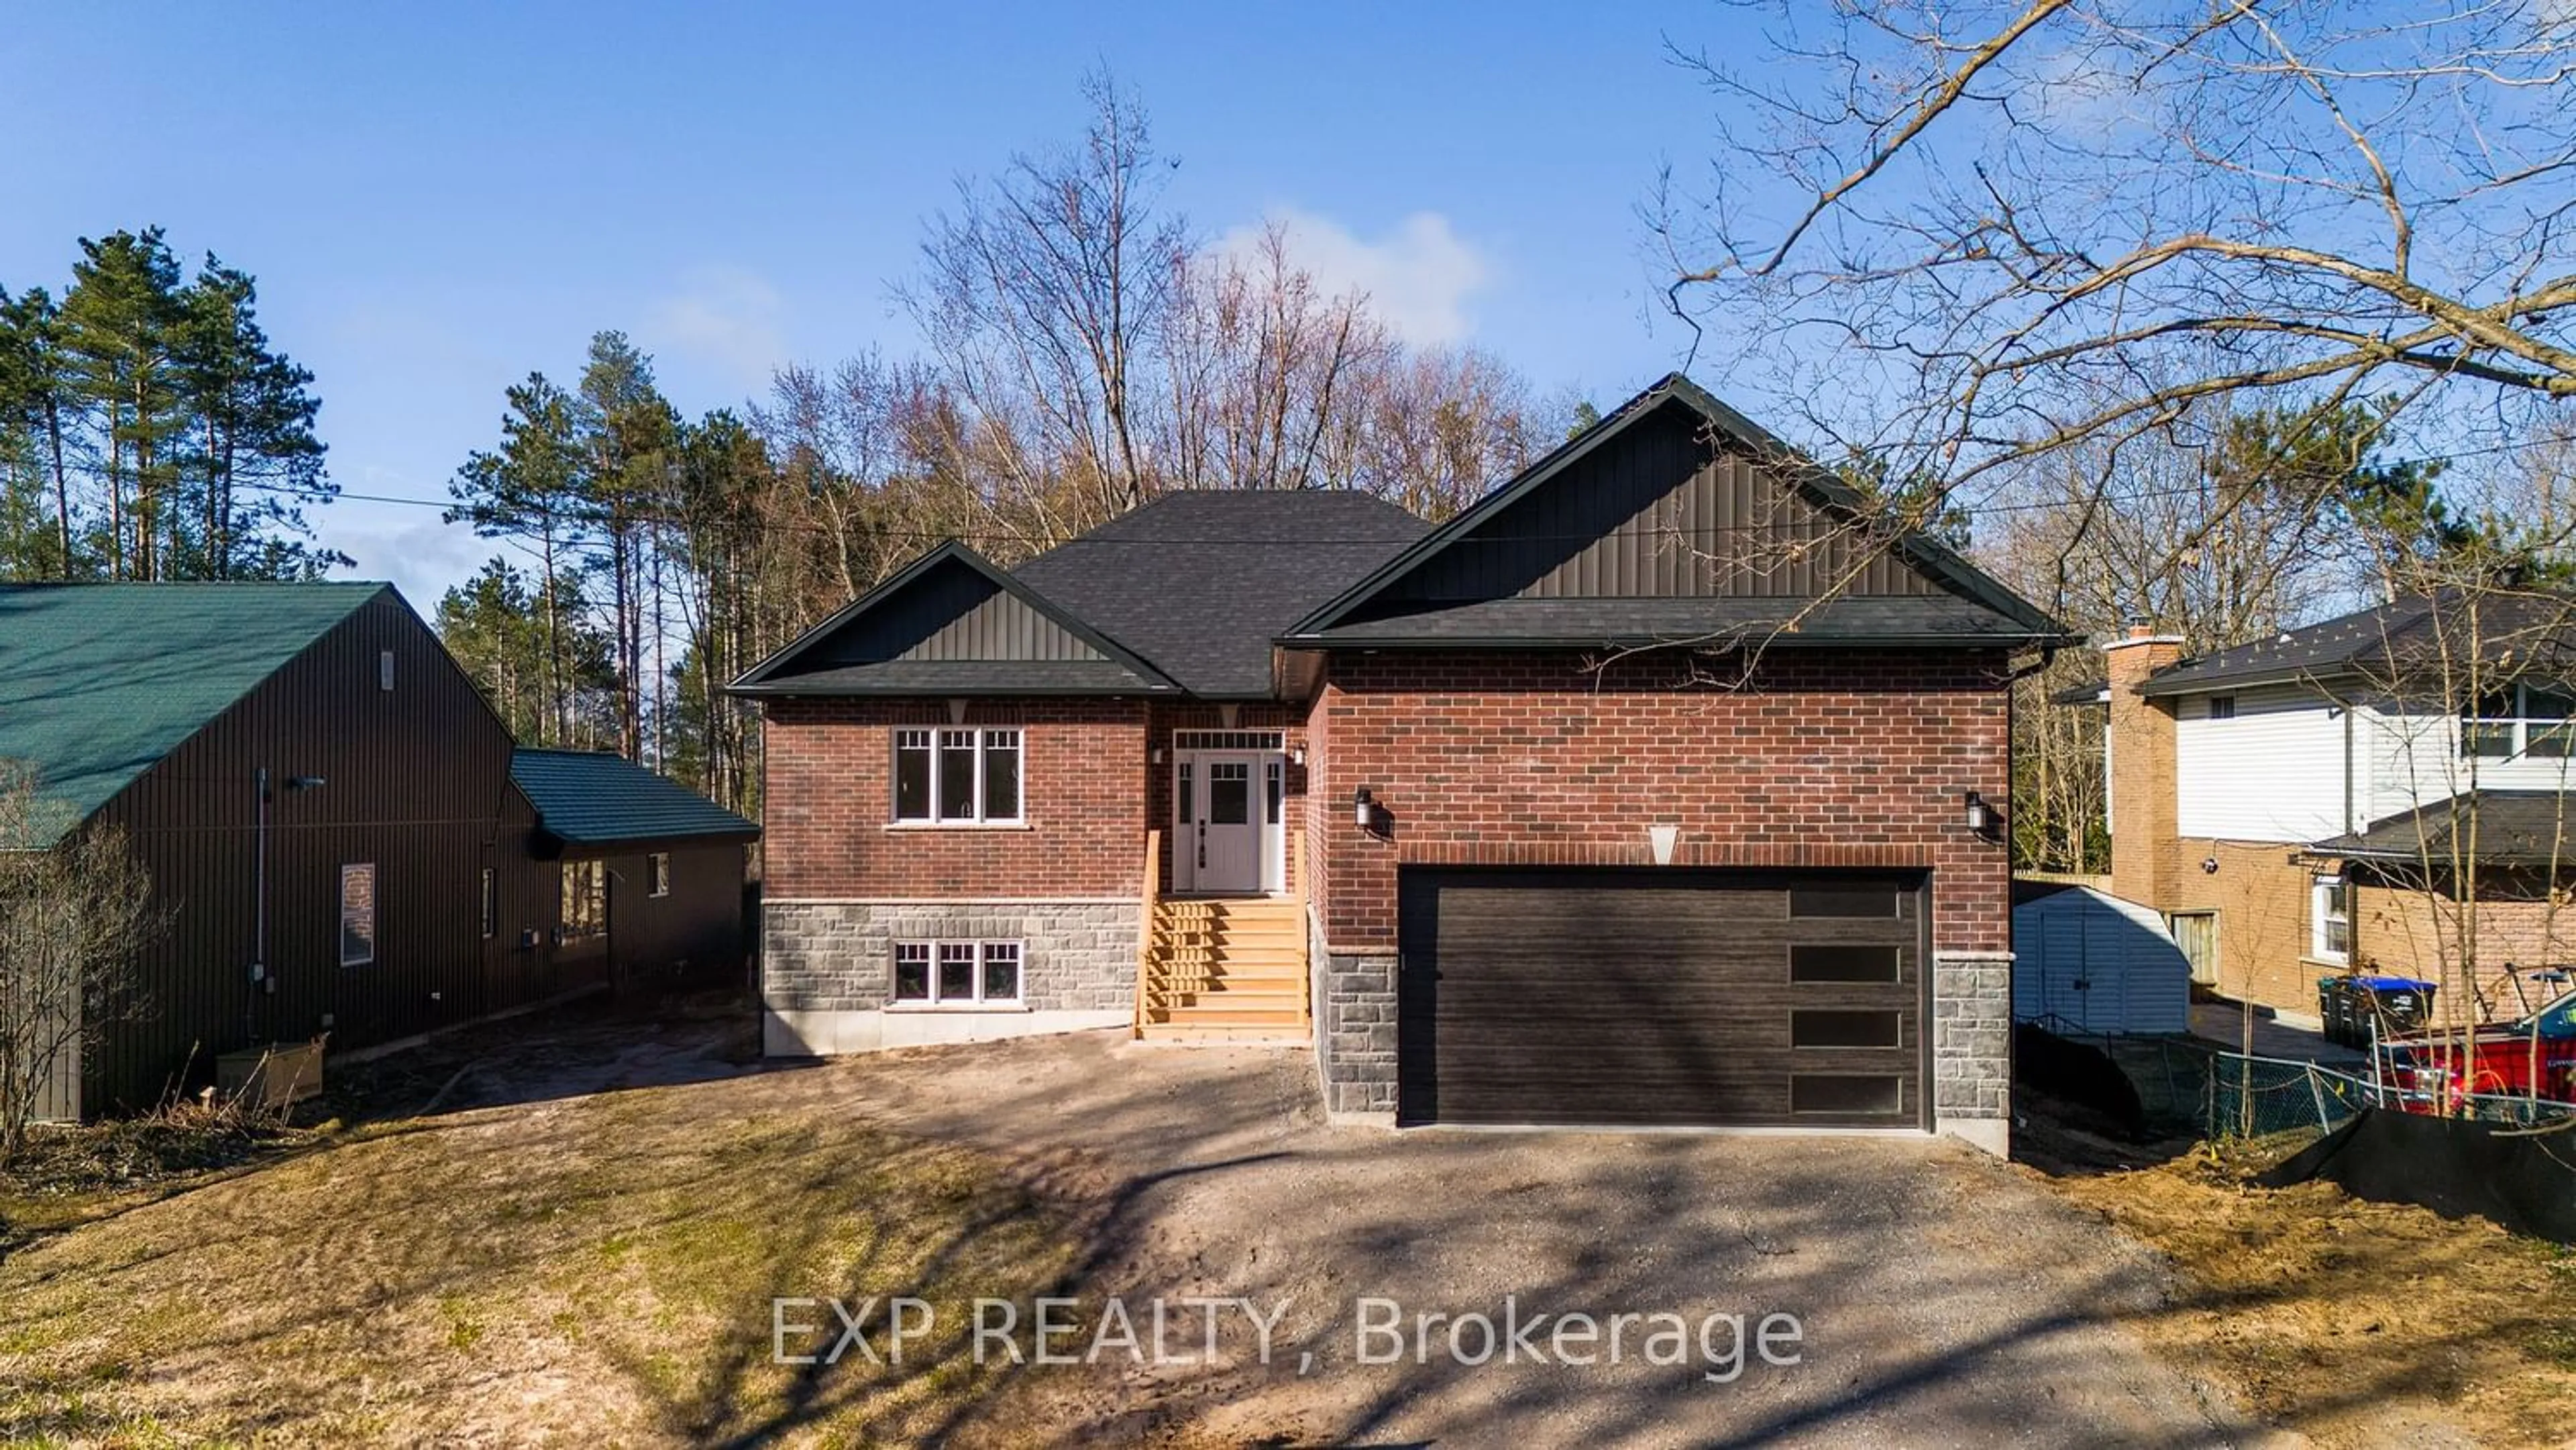 Home with brick exterior material for 8 Alexander St, Springwater Ontario L3V 3T8